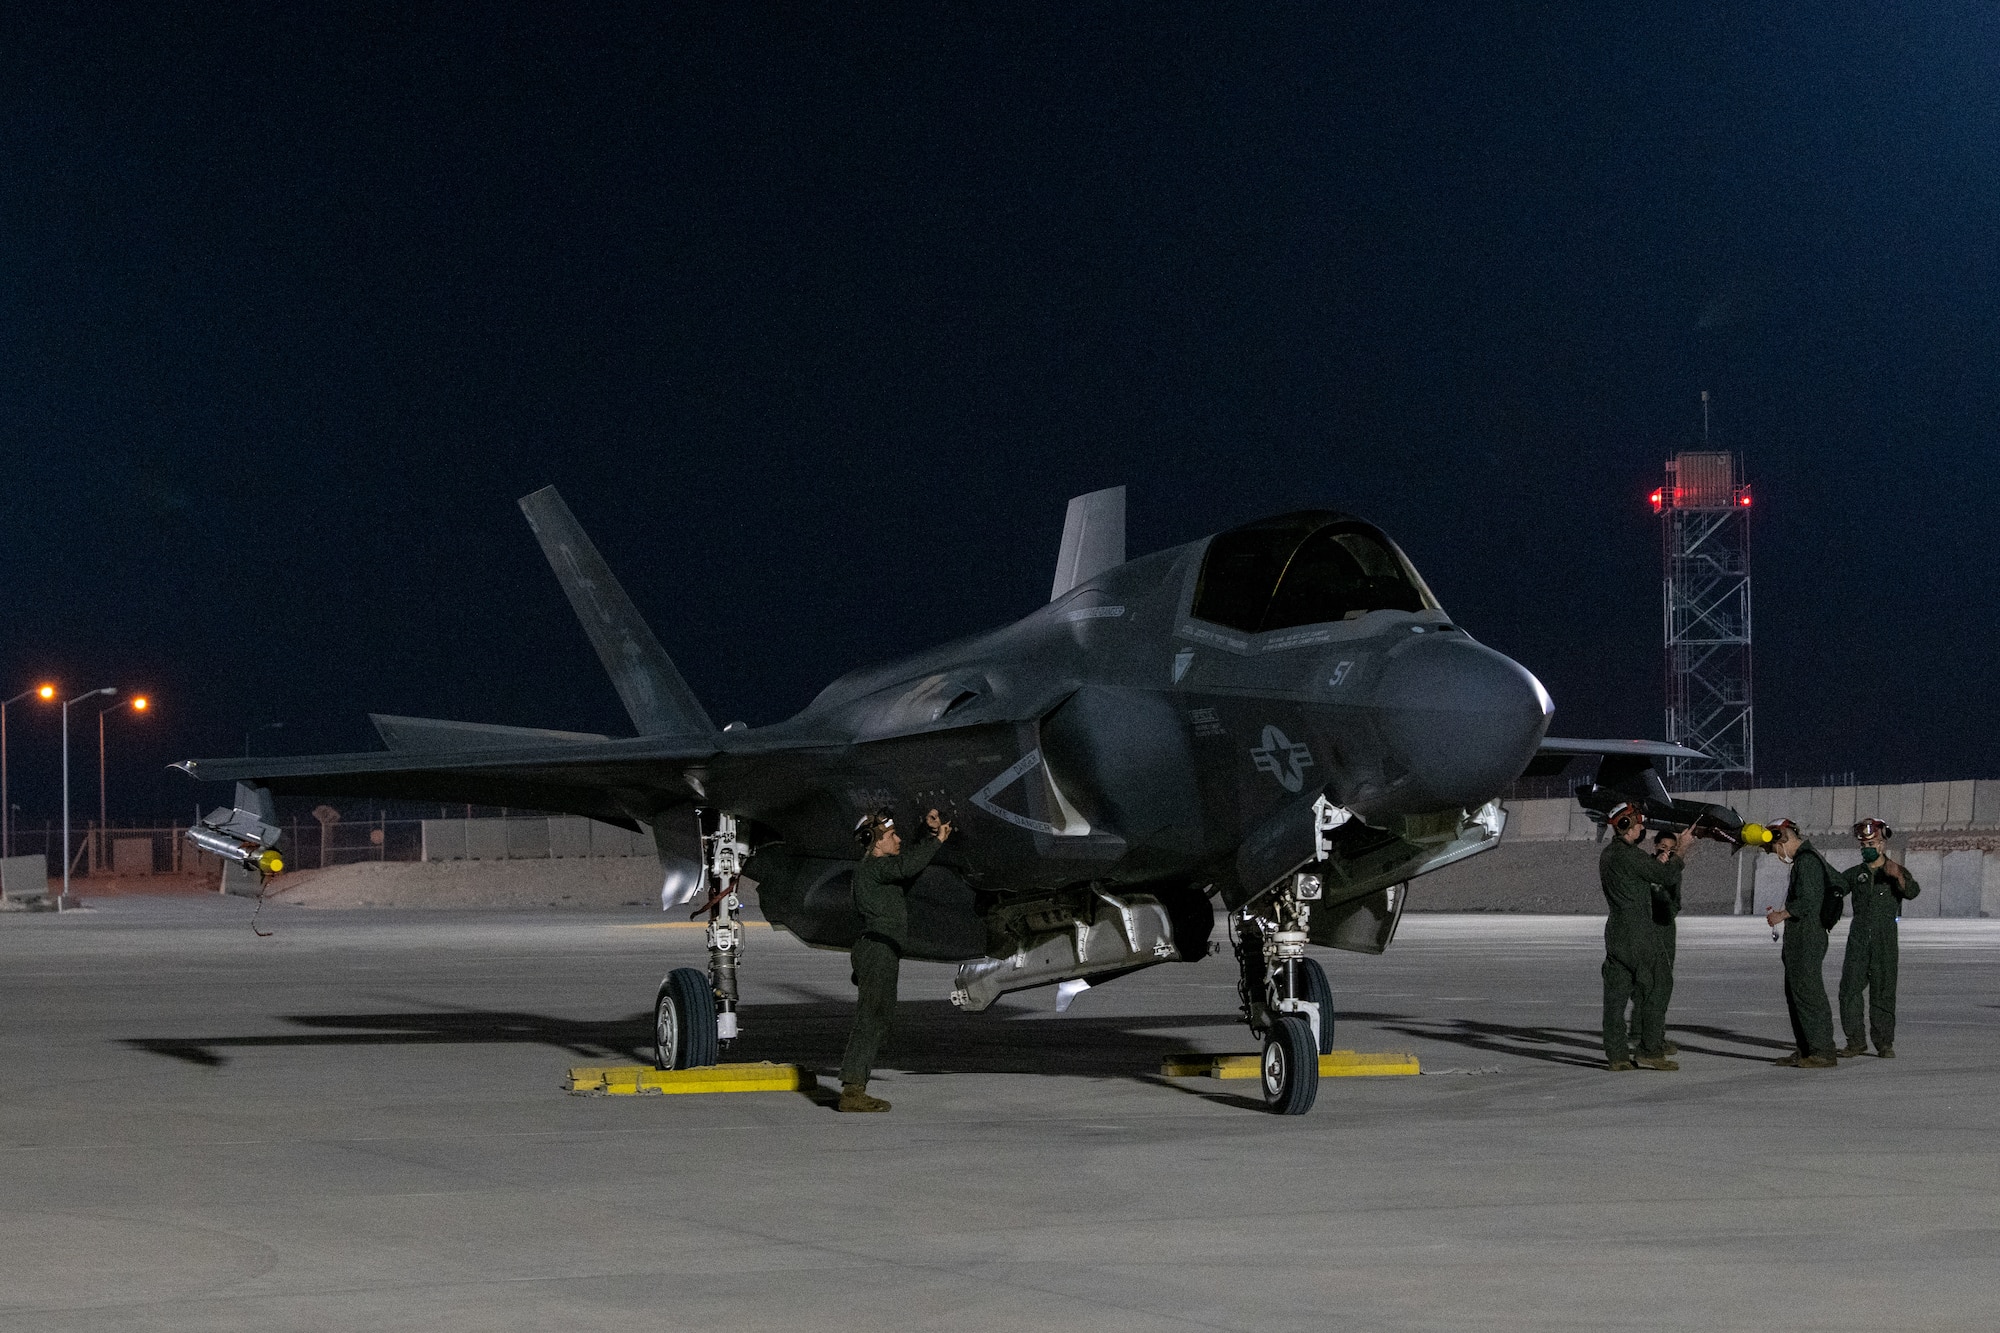 A U.S. Marines prepare to launch an F-35B Lightning II aircraft, assigned to the Marine Medium Tiltrotor Squadron 164 (Reinforced), 15th Marine Expeditionary Unit, by conducting a foreign object debris clearance walk during an Air Forces Central Agile Combat Employment Capstone event at Al Udeid Air Base, Qatar, March 3, 2021. The F-35B Lightning II is the U.S. Marine Corps variant of the 5th generation fighter. The capstone event enhanced theater ACE competencies, validating operational capabilities and command and control while simultaneously strengthening joint and regional partnerships.